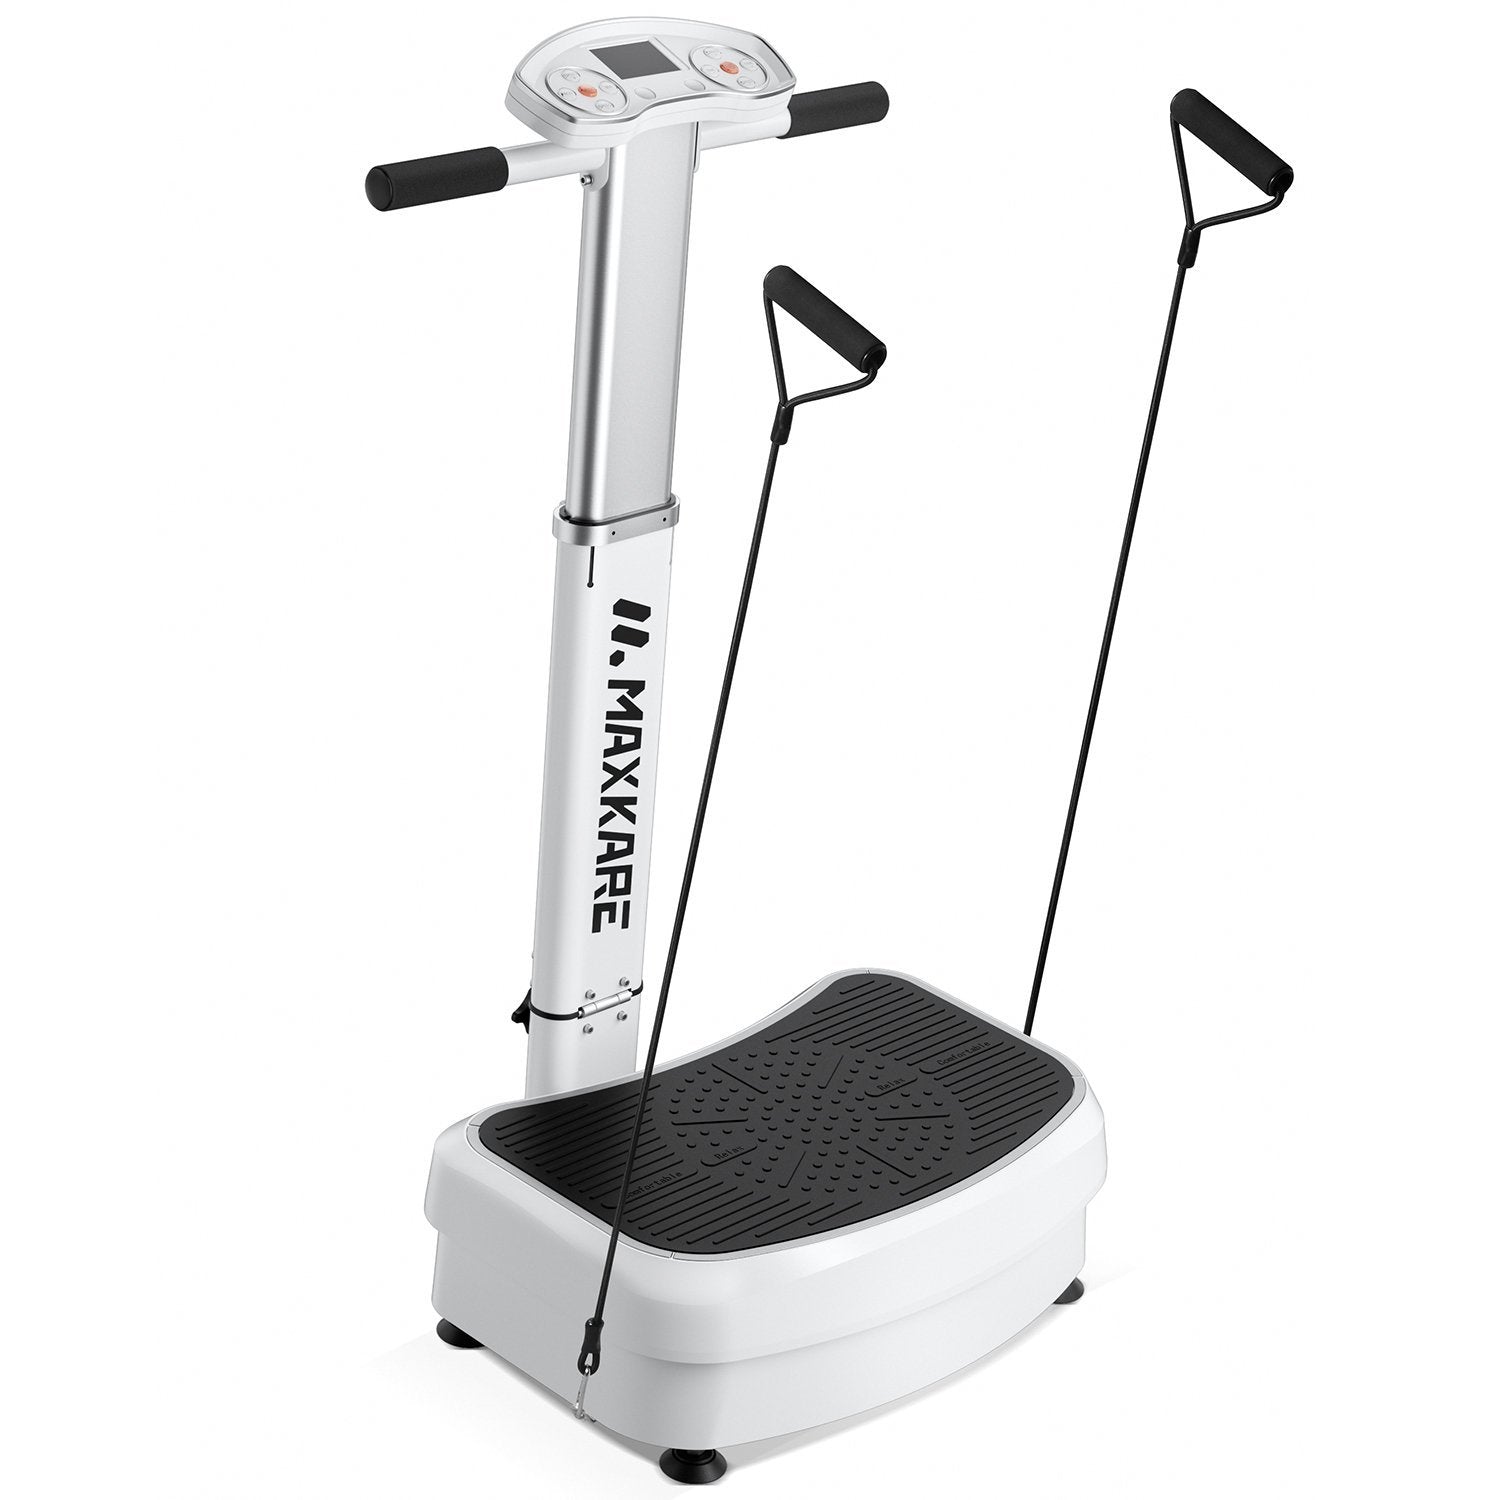 Super Body Shaper Power Max Vibration Plate $42 - Wholesale China Power Max  Vibration Plate at Factory Prices from Zhejiang Todo Hardware Manufacture  Co. Ltd